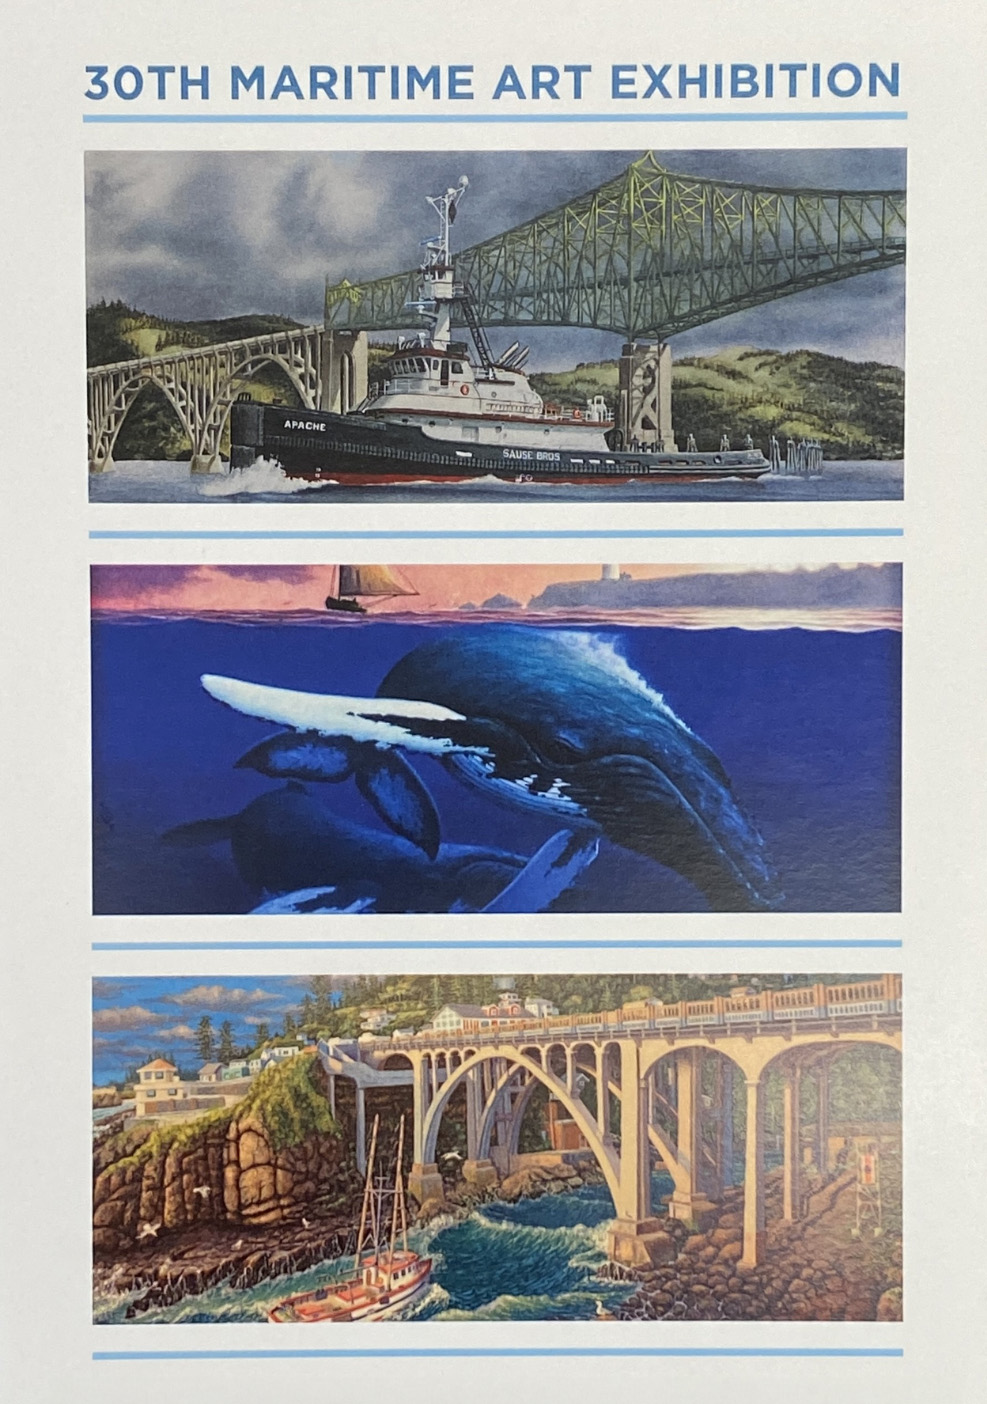 30th Maritime Art Exhibition image of two bridges and an Orca whale